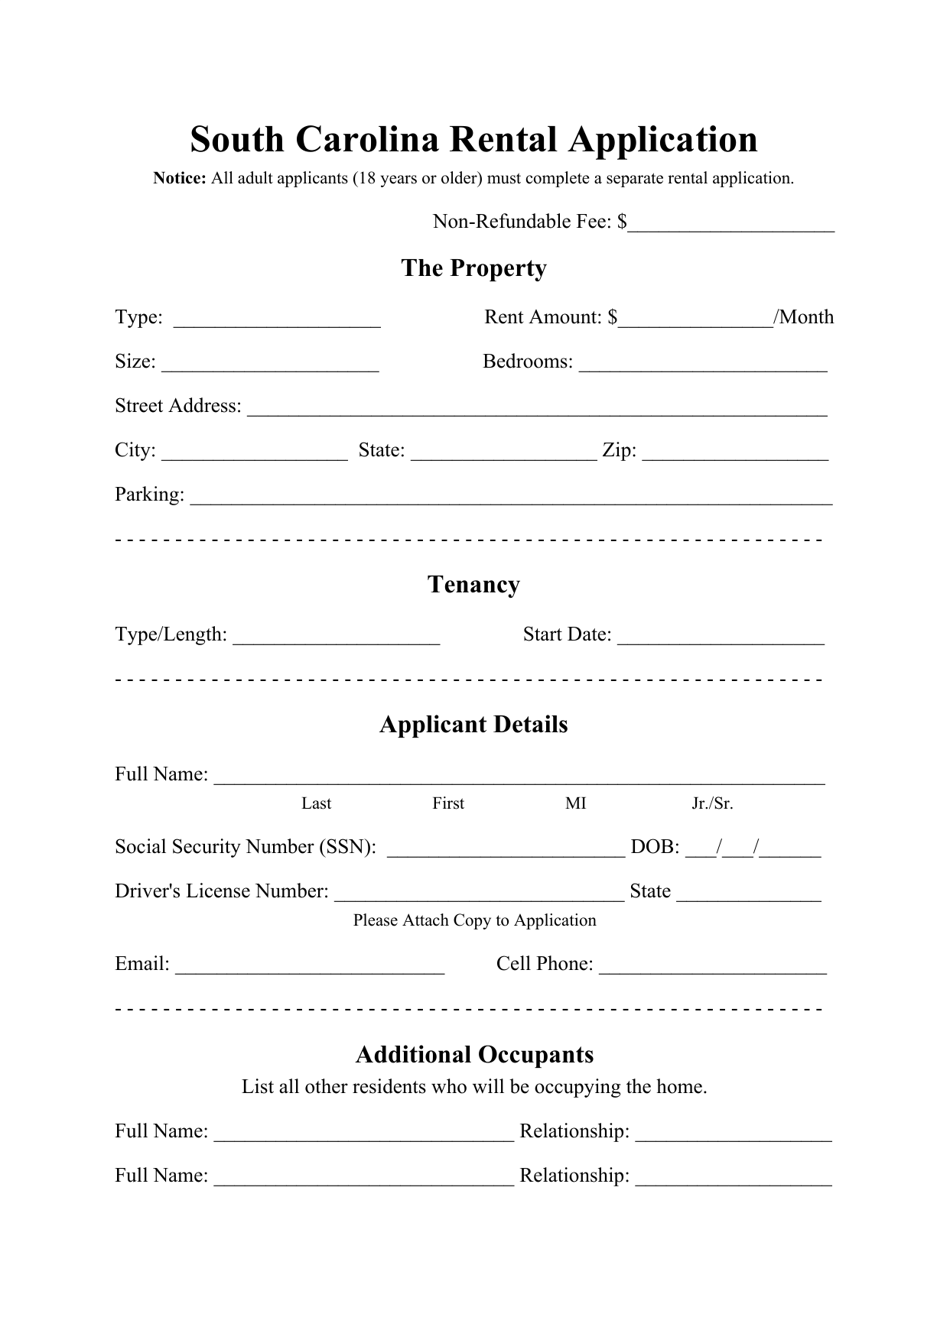 south-carolina-rental-application-form-fill-out-sign-online-and